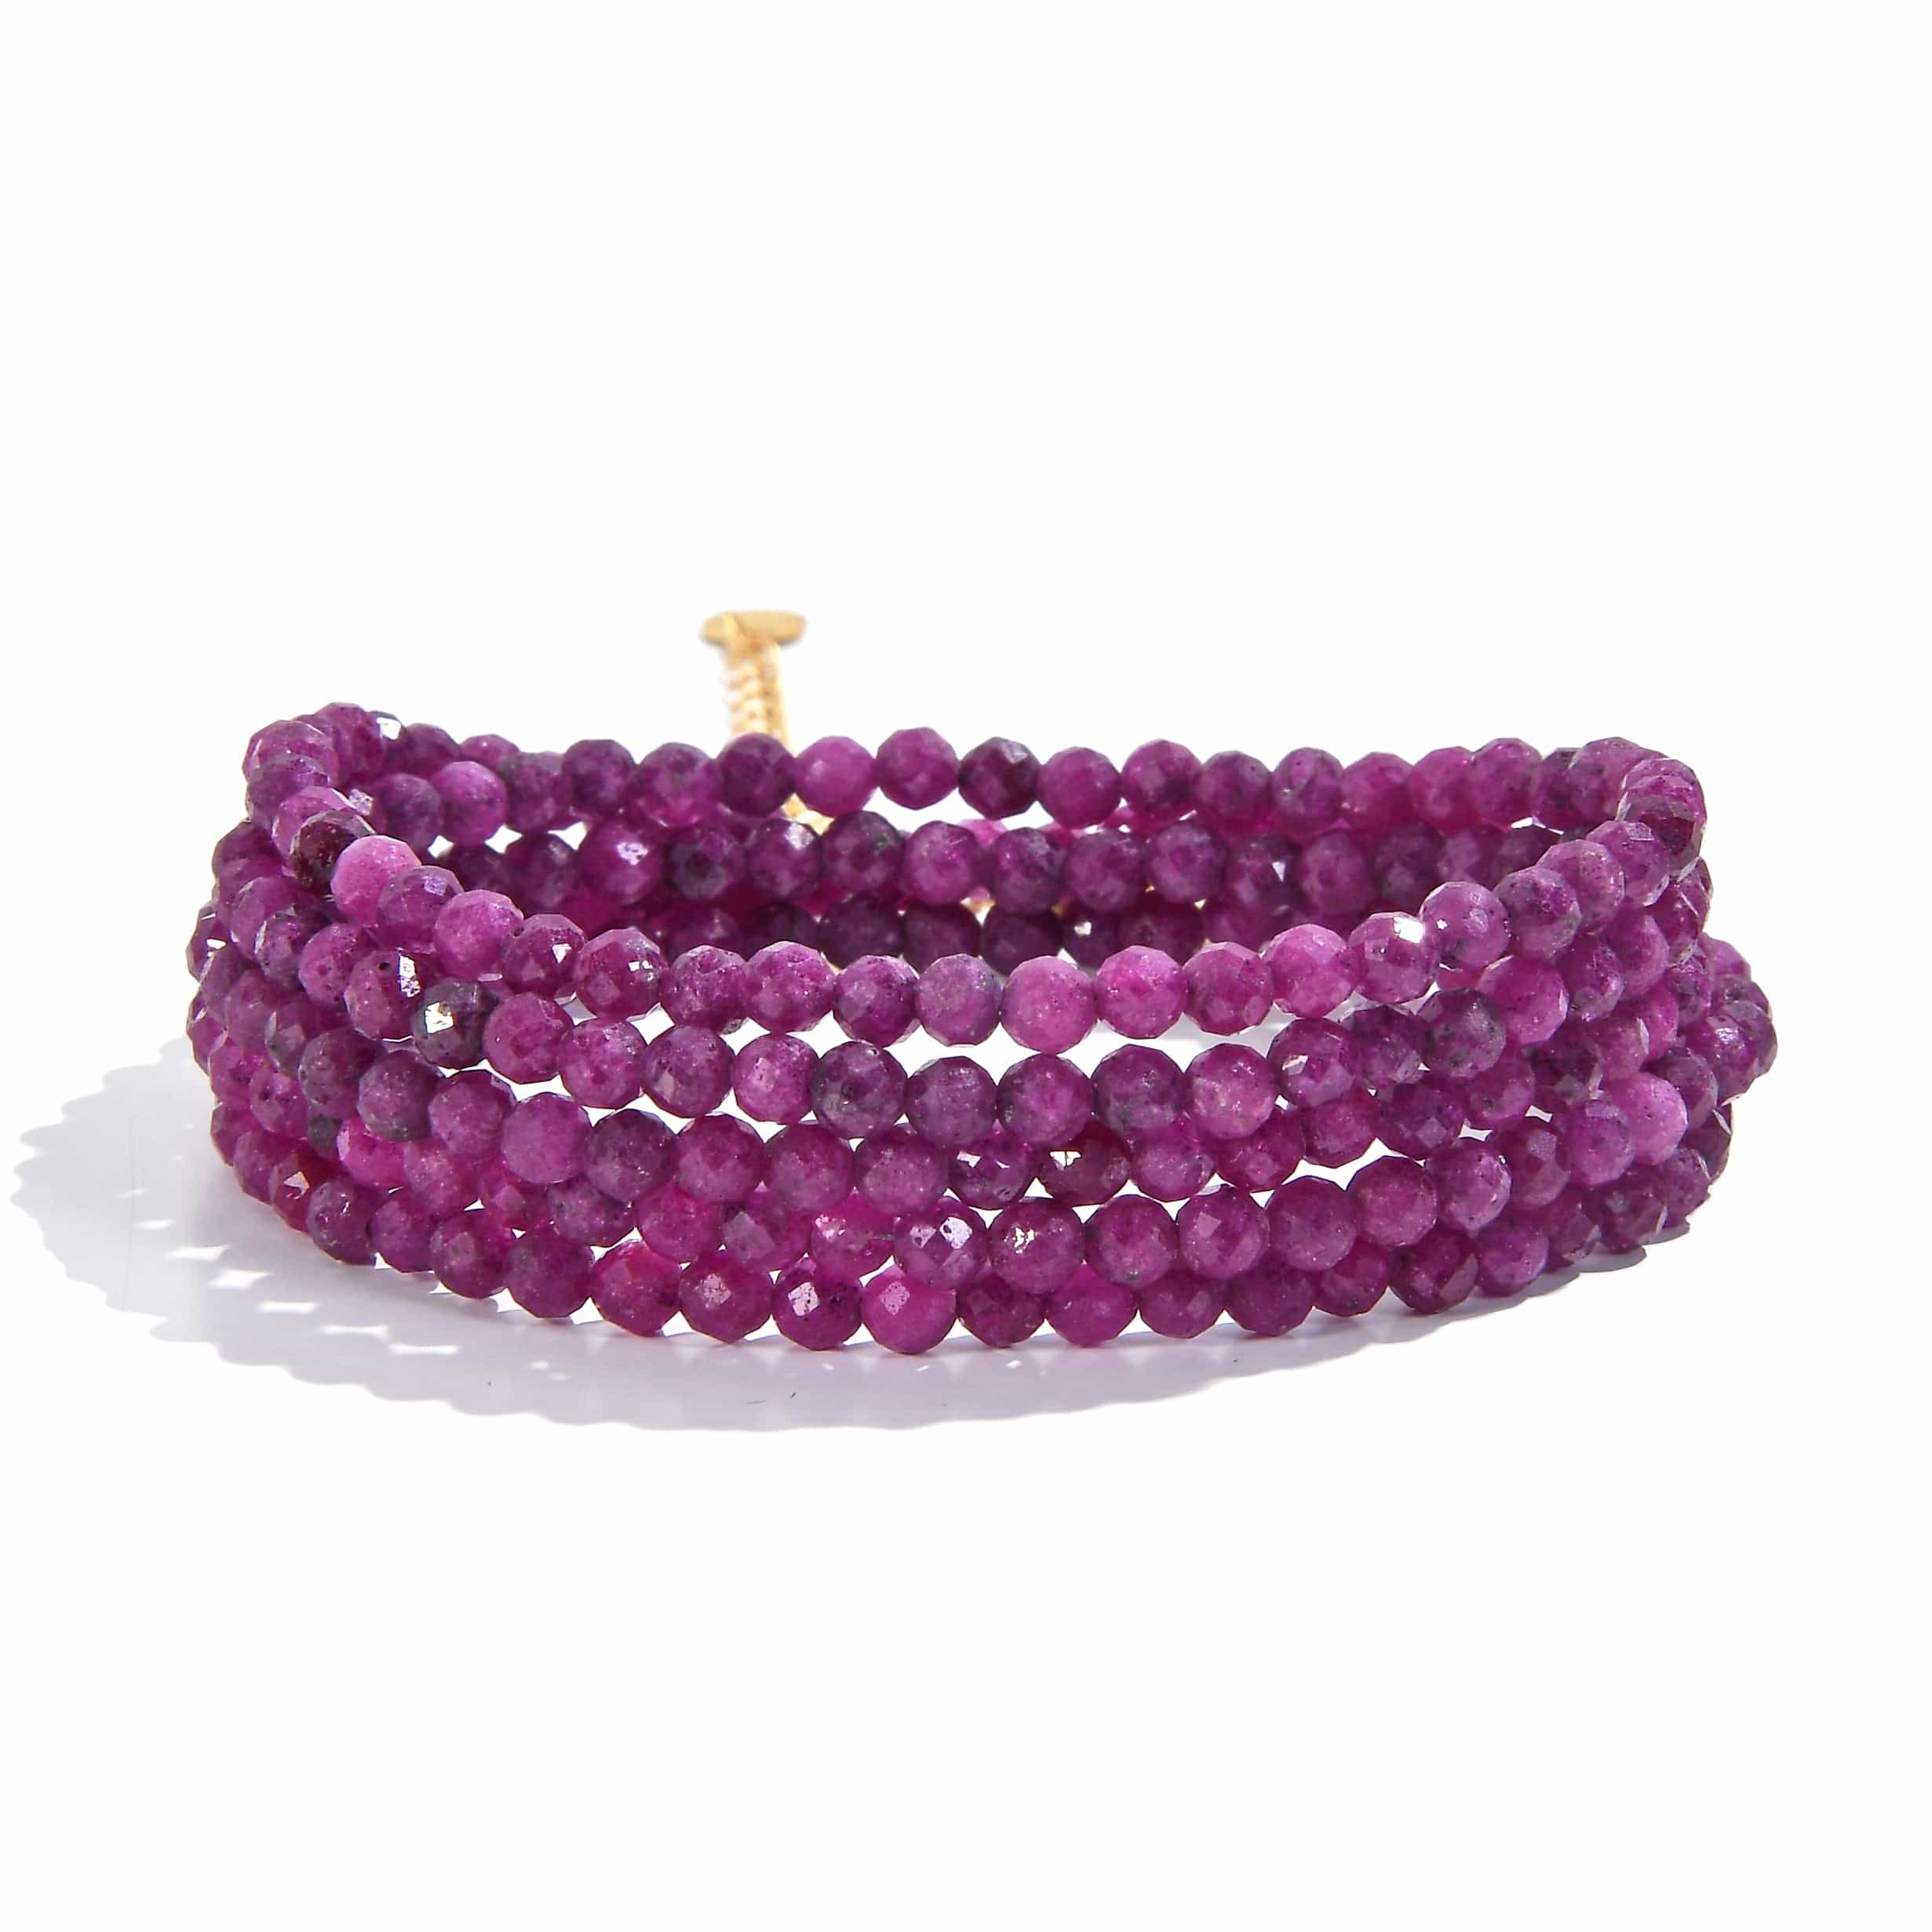 KALIFANO Gemstone Jewelry 3mm Ruby Faceted 31" Necklace / Multi Wrap Bracelet N3-79G-RB